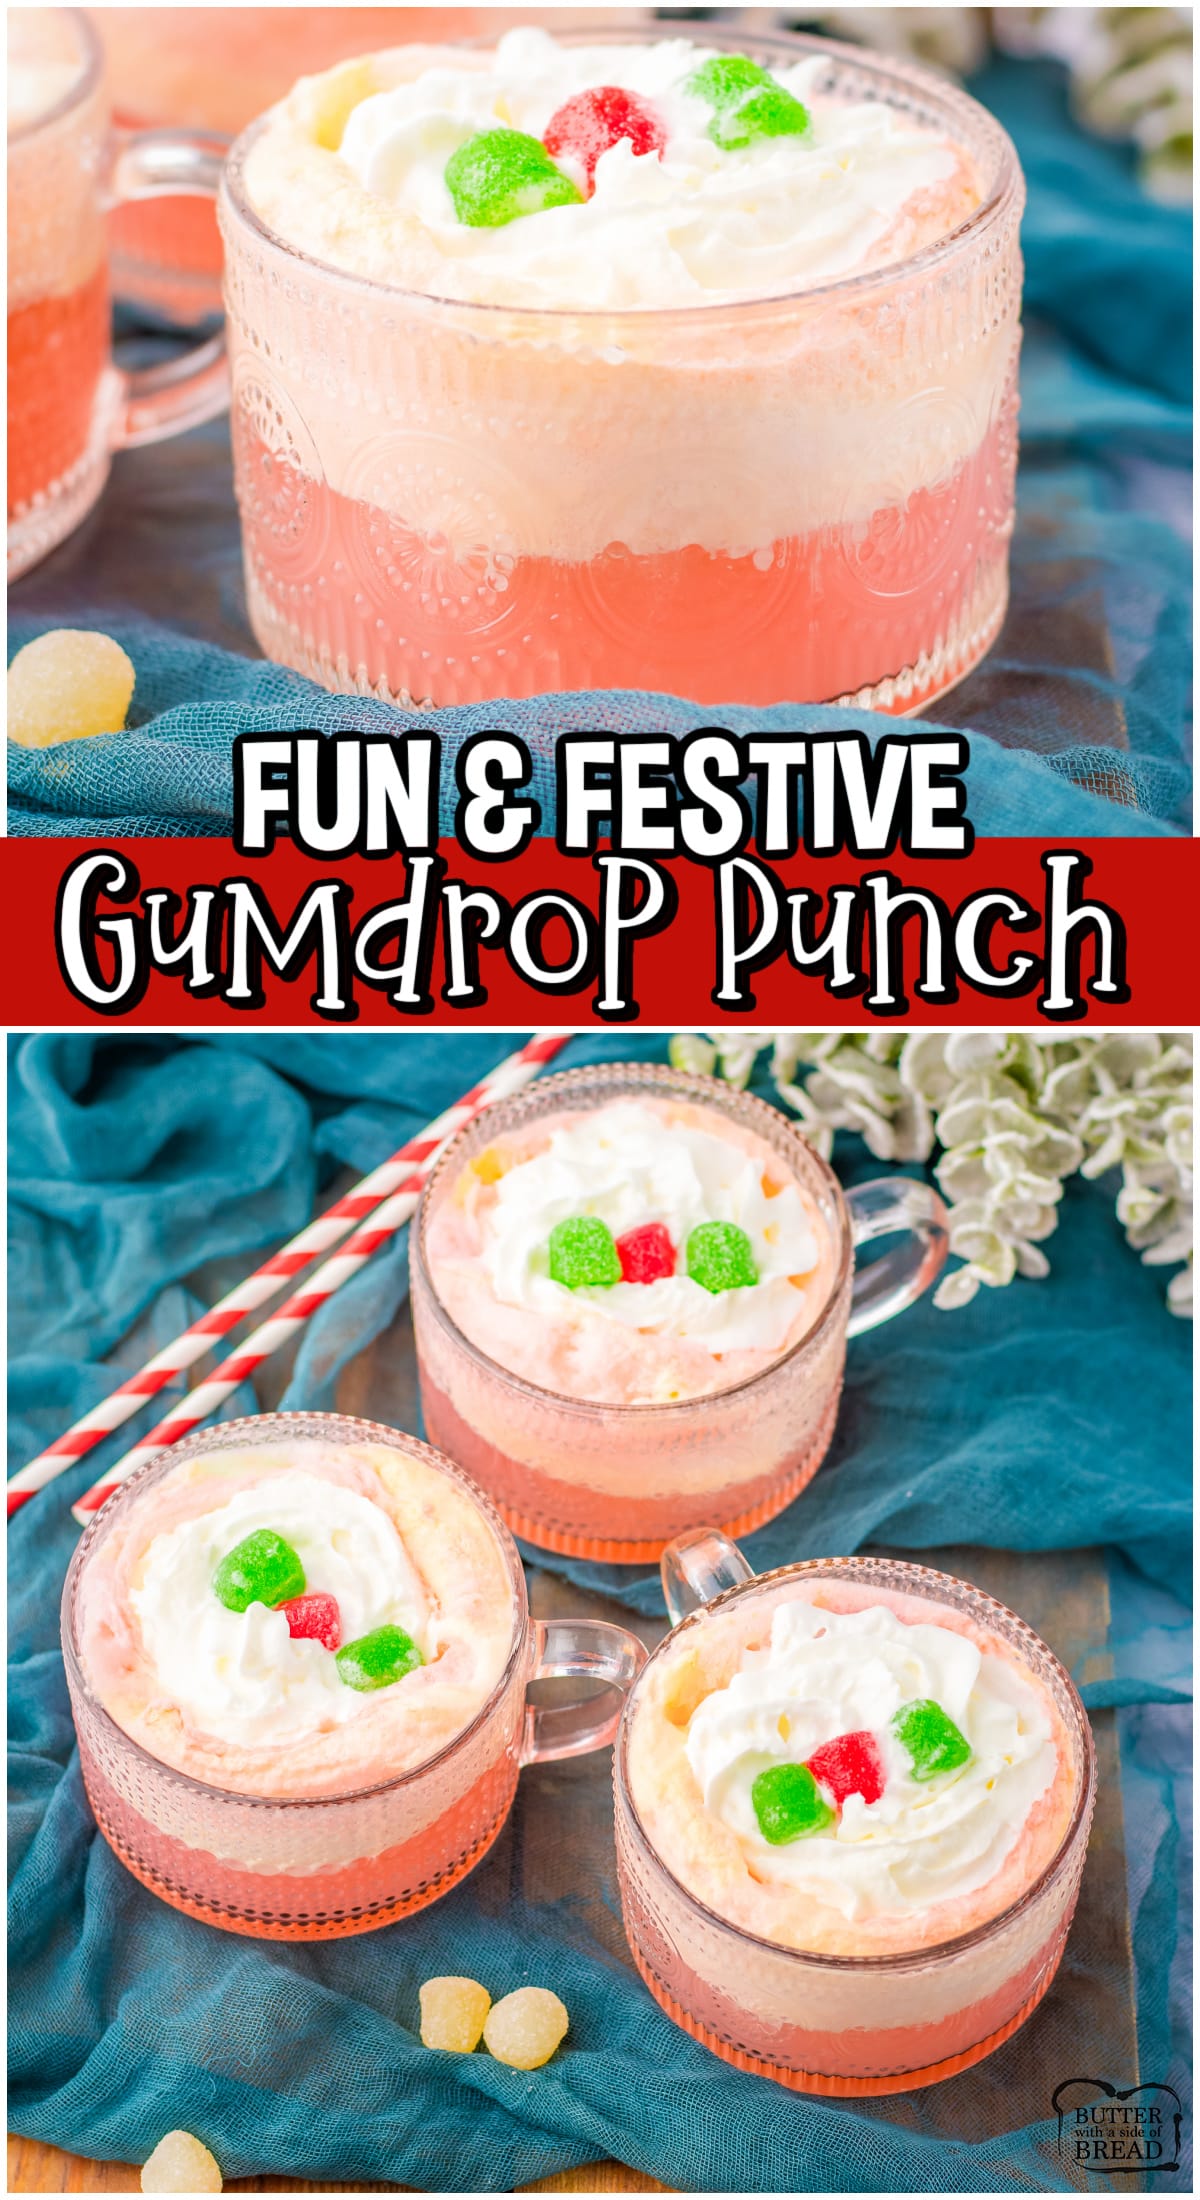 Christmas Gumdrop Punch is a festive, fruity drink made with Cherry 7-Up, rainbow sherbet & vanilla ice cream & is perfect for holiday gatherings!